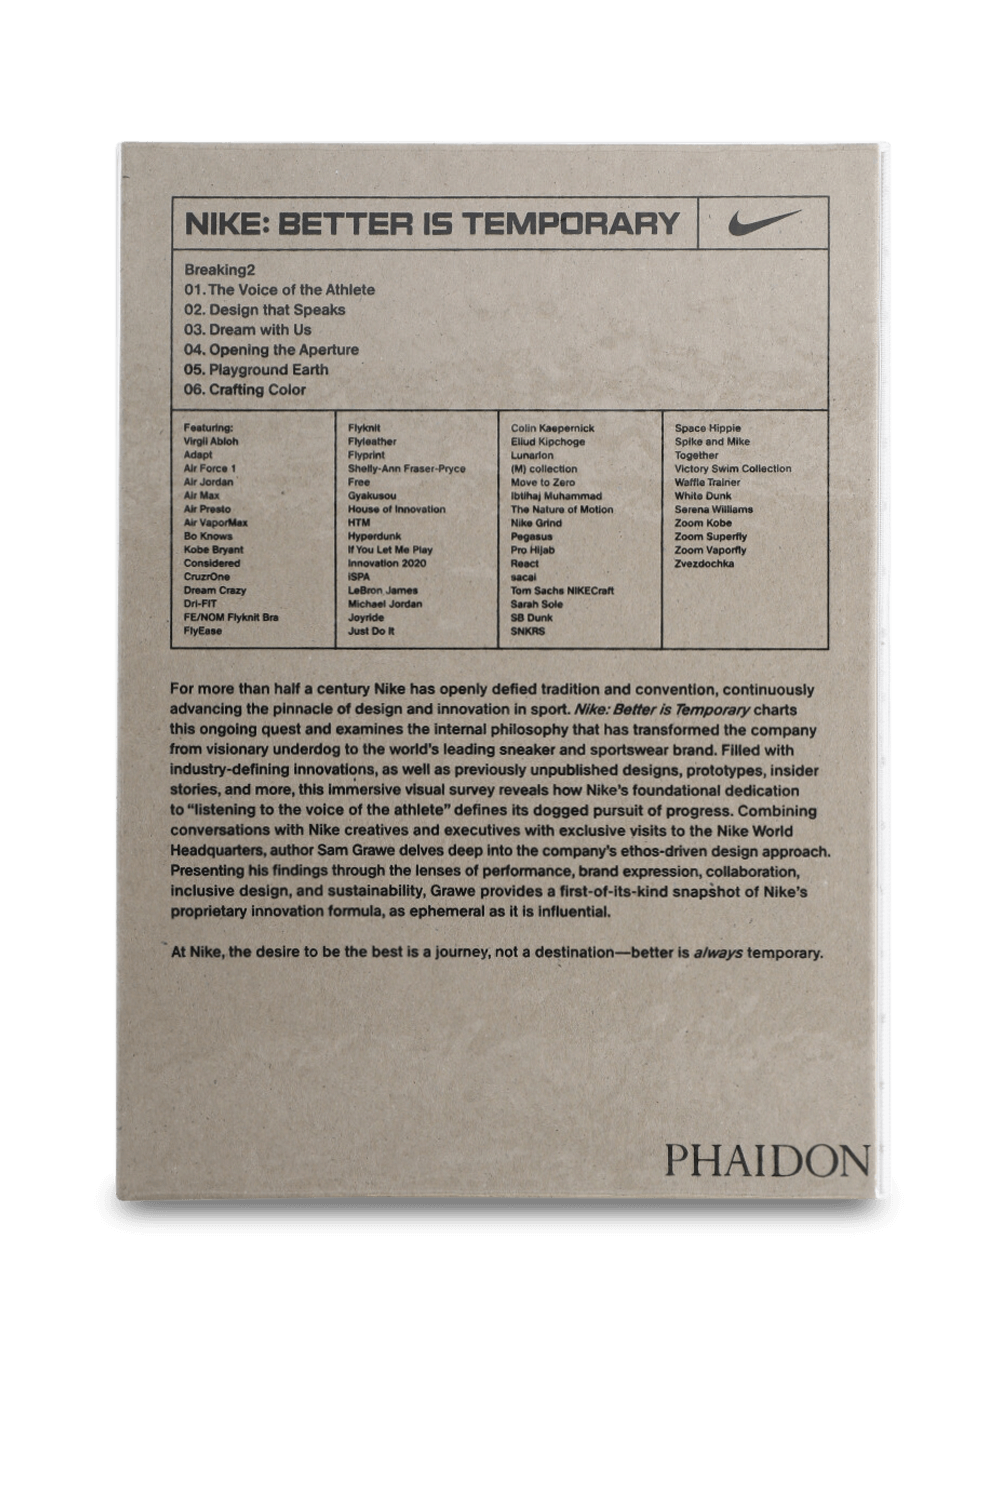 Nike: Better is Temporary PHAIDON